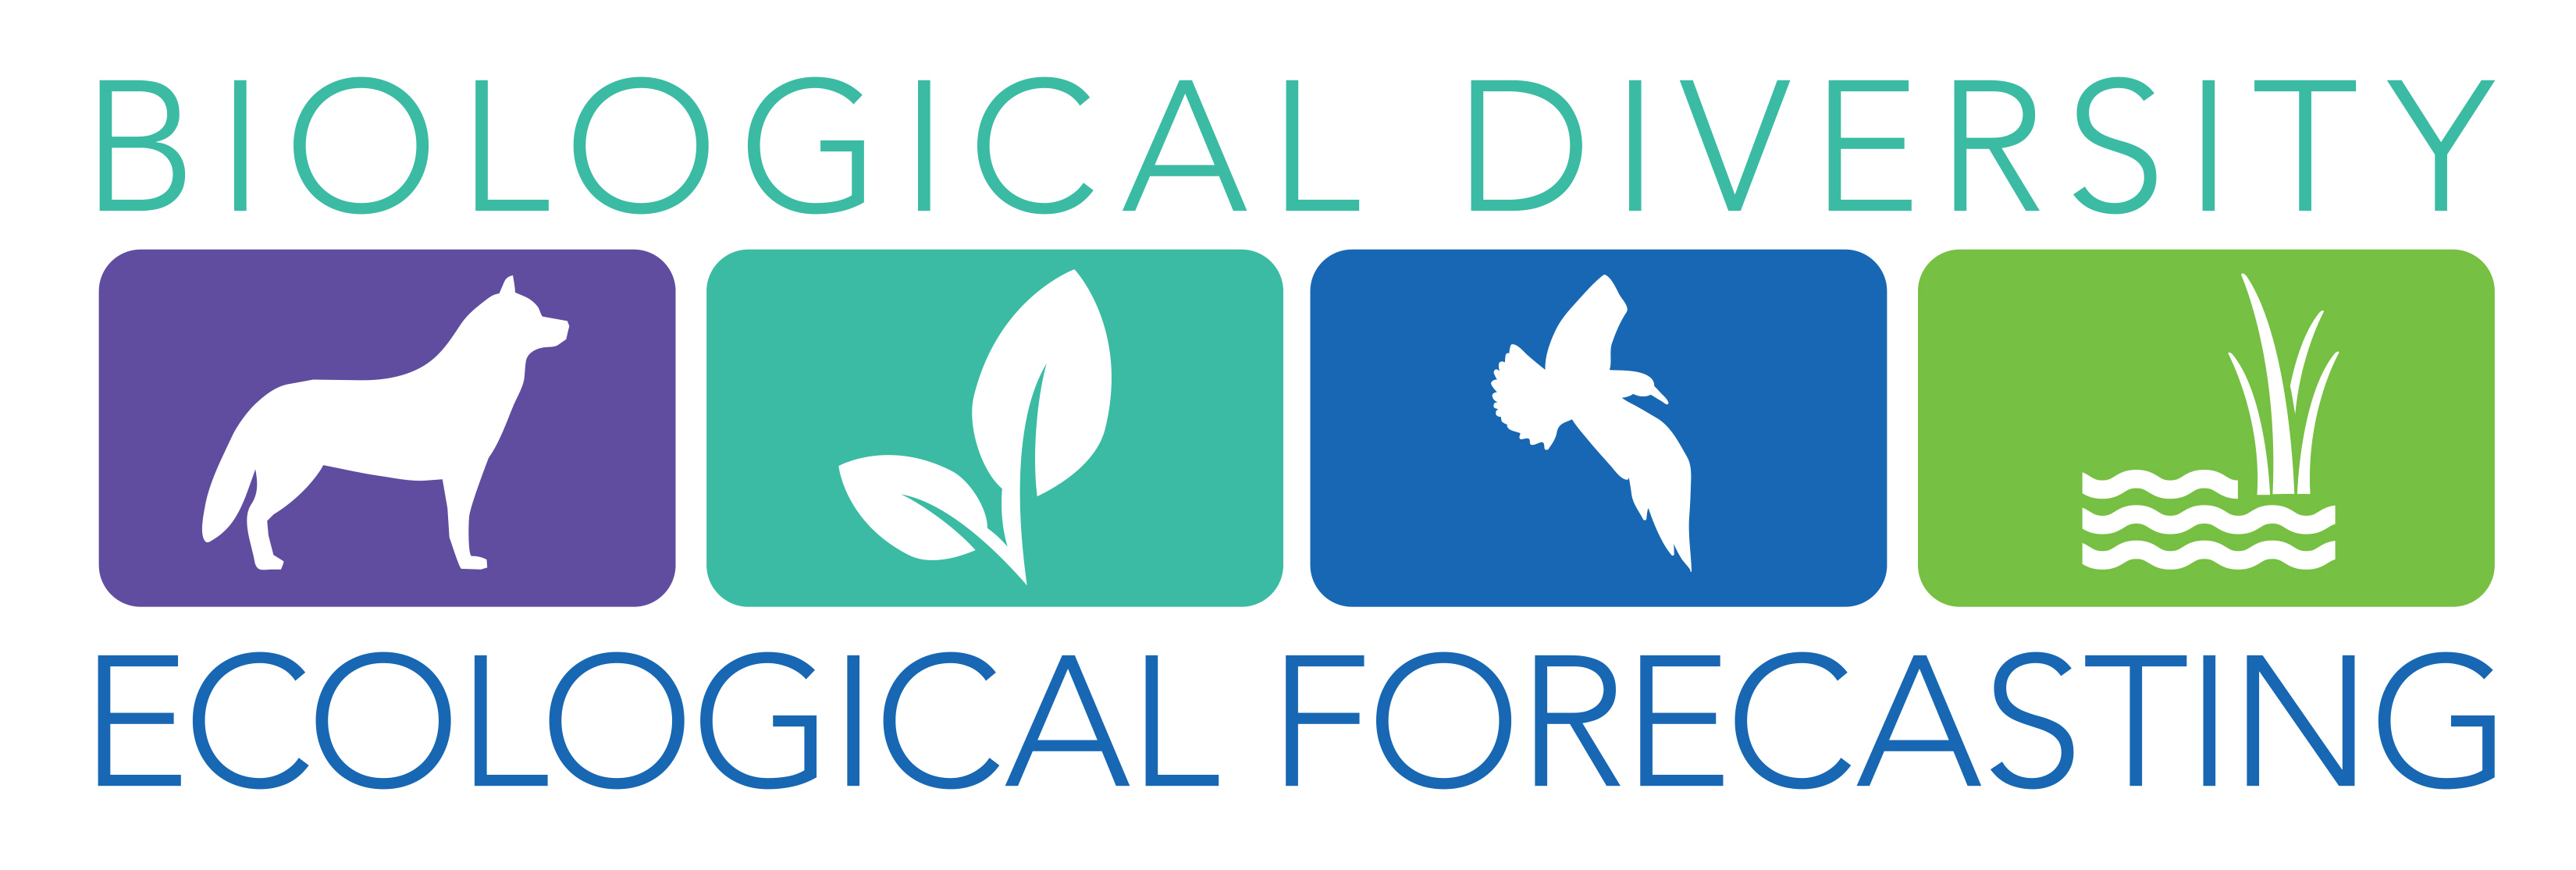 Biological Diversity and Ecological Forecasting Campaign logo , which contains images of a wolf, a leaf, a bird and aquatic vegetation